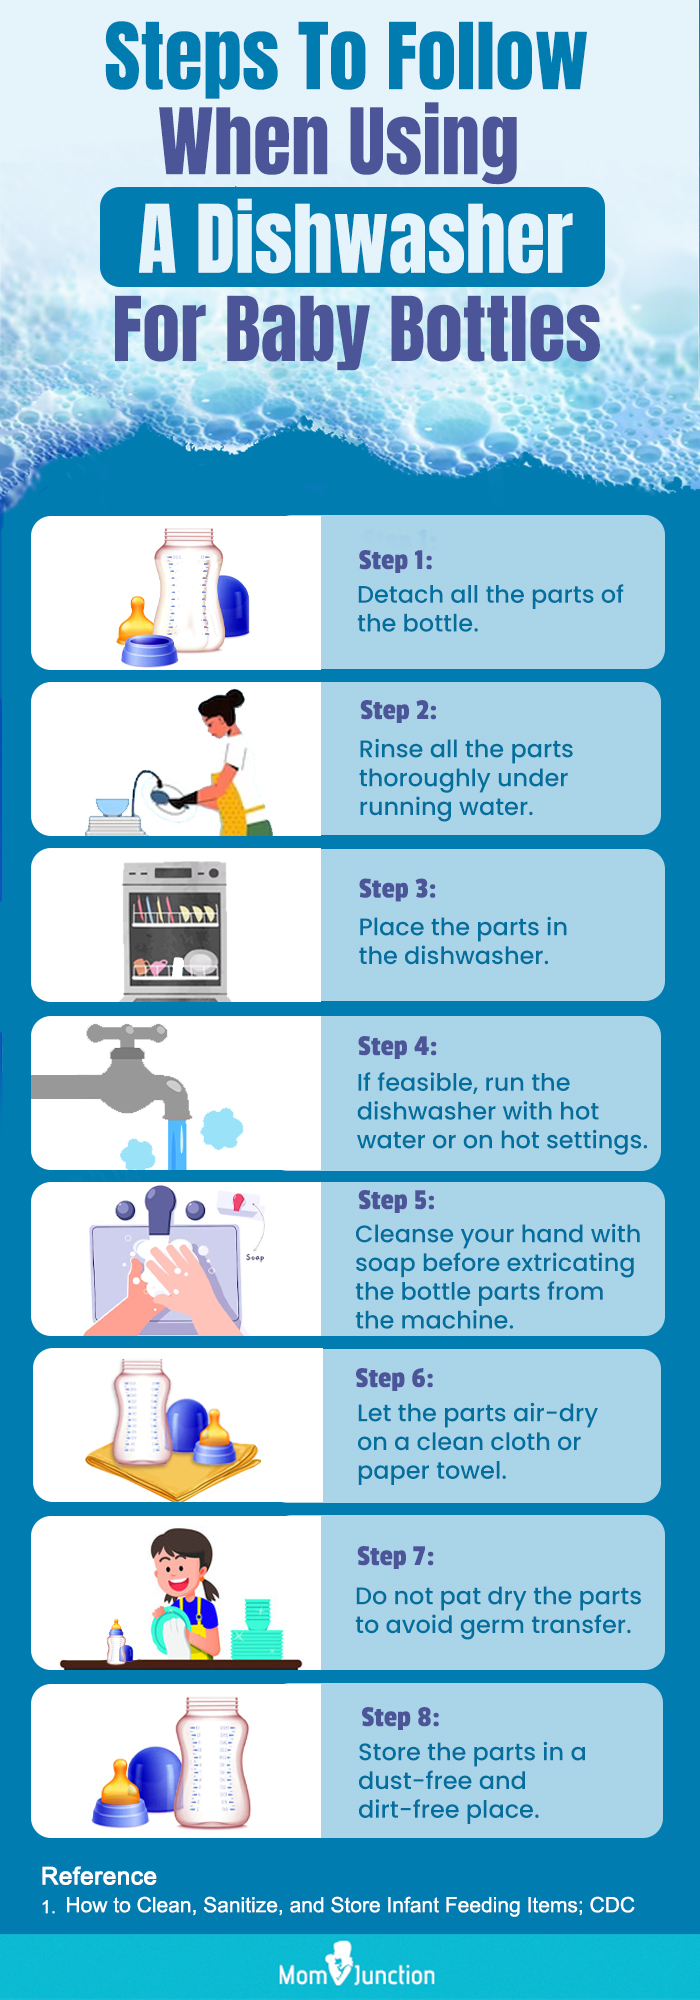 Steps To Follow When Using A Dishwasher For Baby Bottles (Infographic)